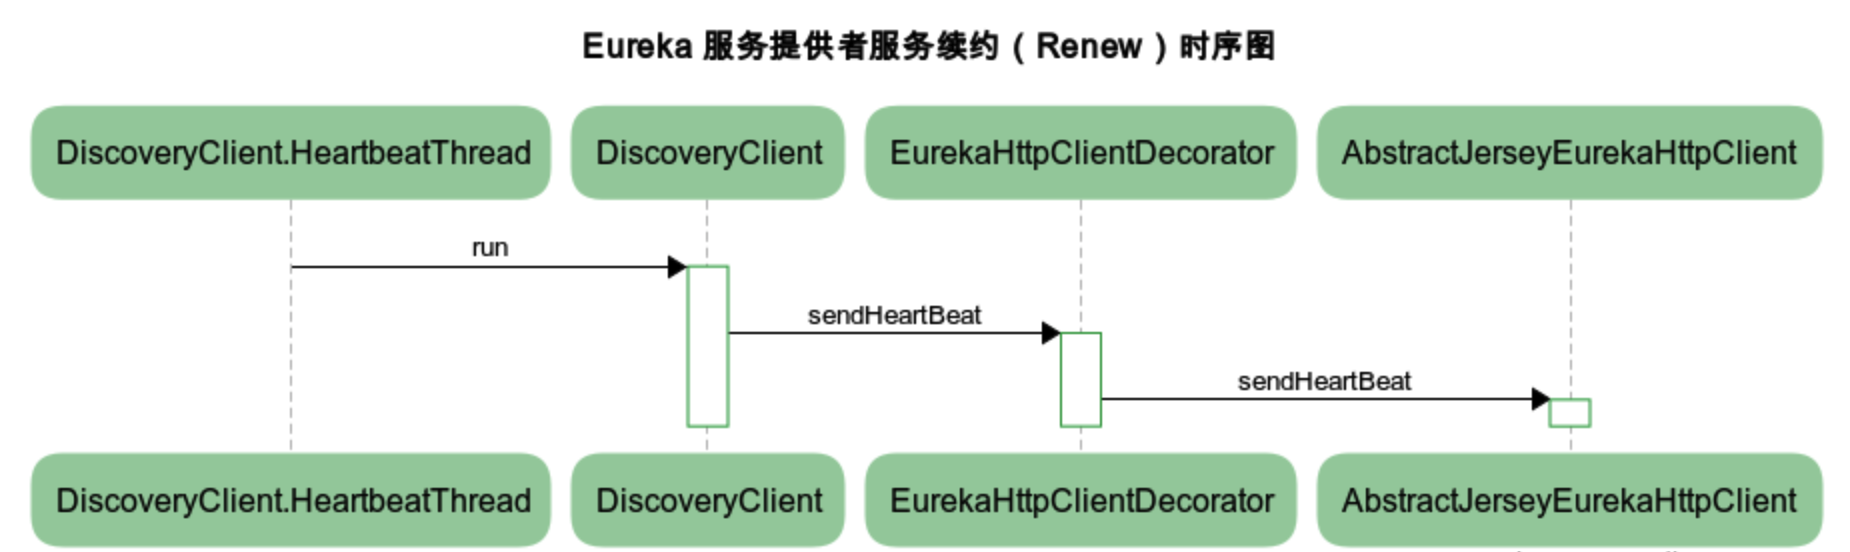 docs/micro-services/images/eureka-service-provider-renew-sequence-chart.png